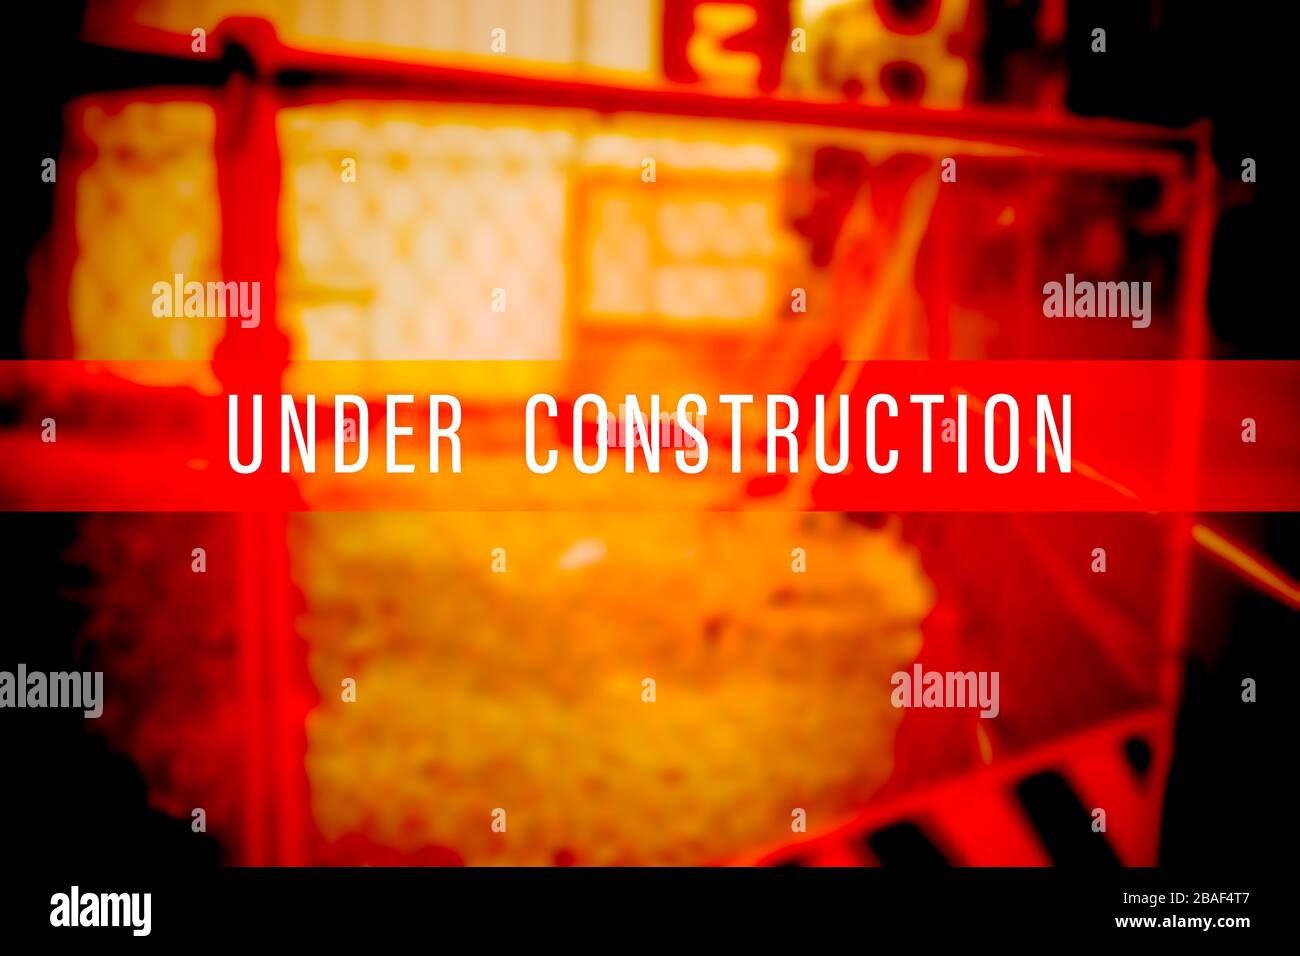 under construction or renovation sign text banner image photo for website or graphic design. Stock Photo